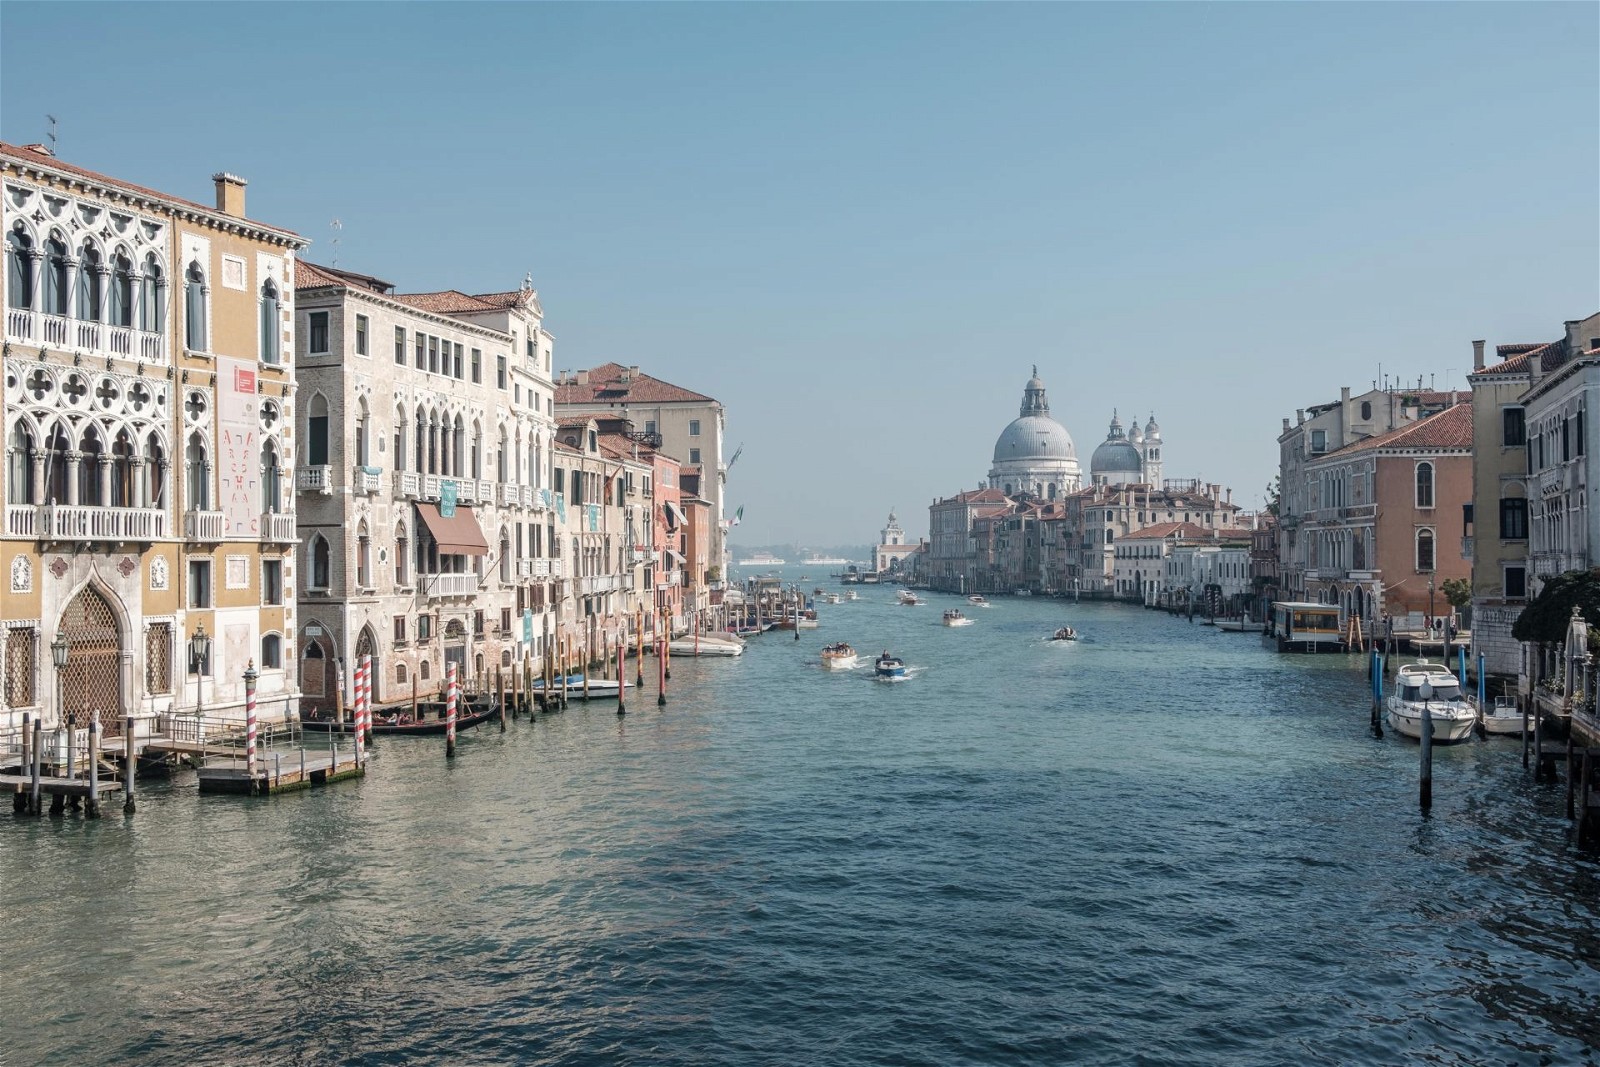 Grand Canal: The Grand Canal is the main waterway in Venice and is lined with beautiful buildings, palaces, and churches